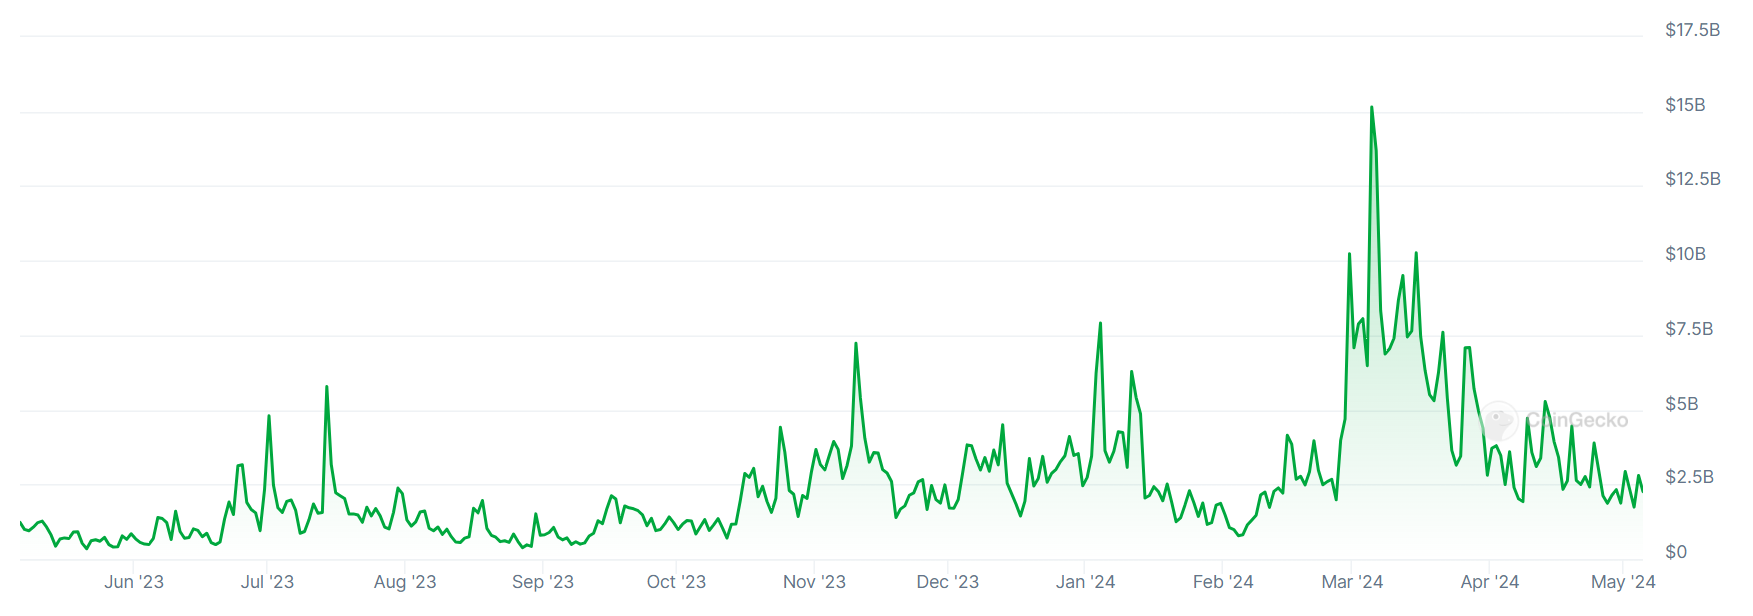 A graph showing trading volumes on South Korea’s Upbit crypto exchange over the past 12 months.